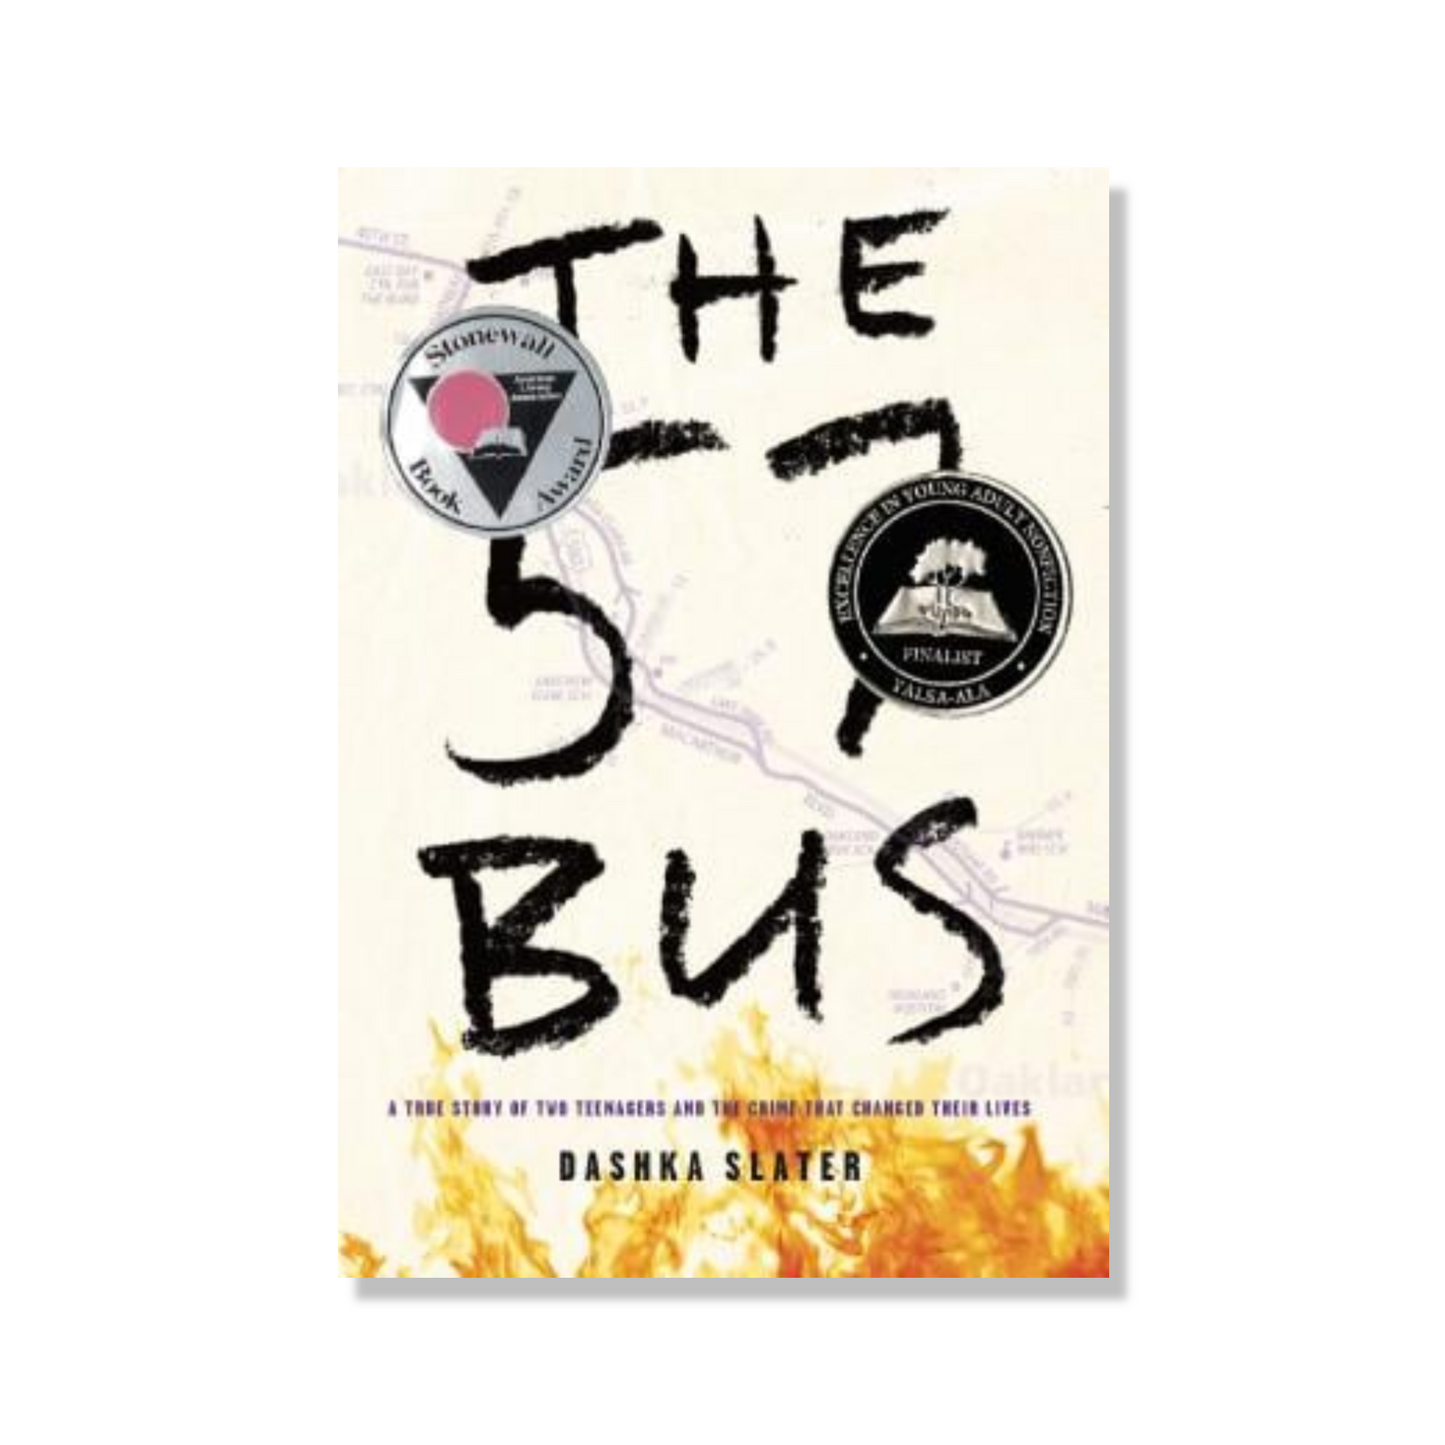 57 Bus: A True Story of Two Teenagers and the Crime That Changed Their Lives